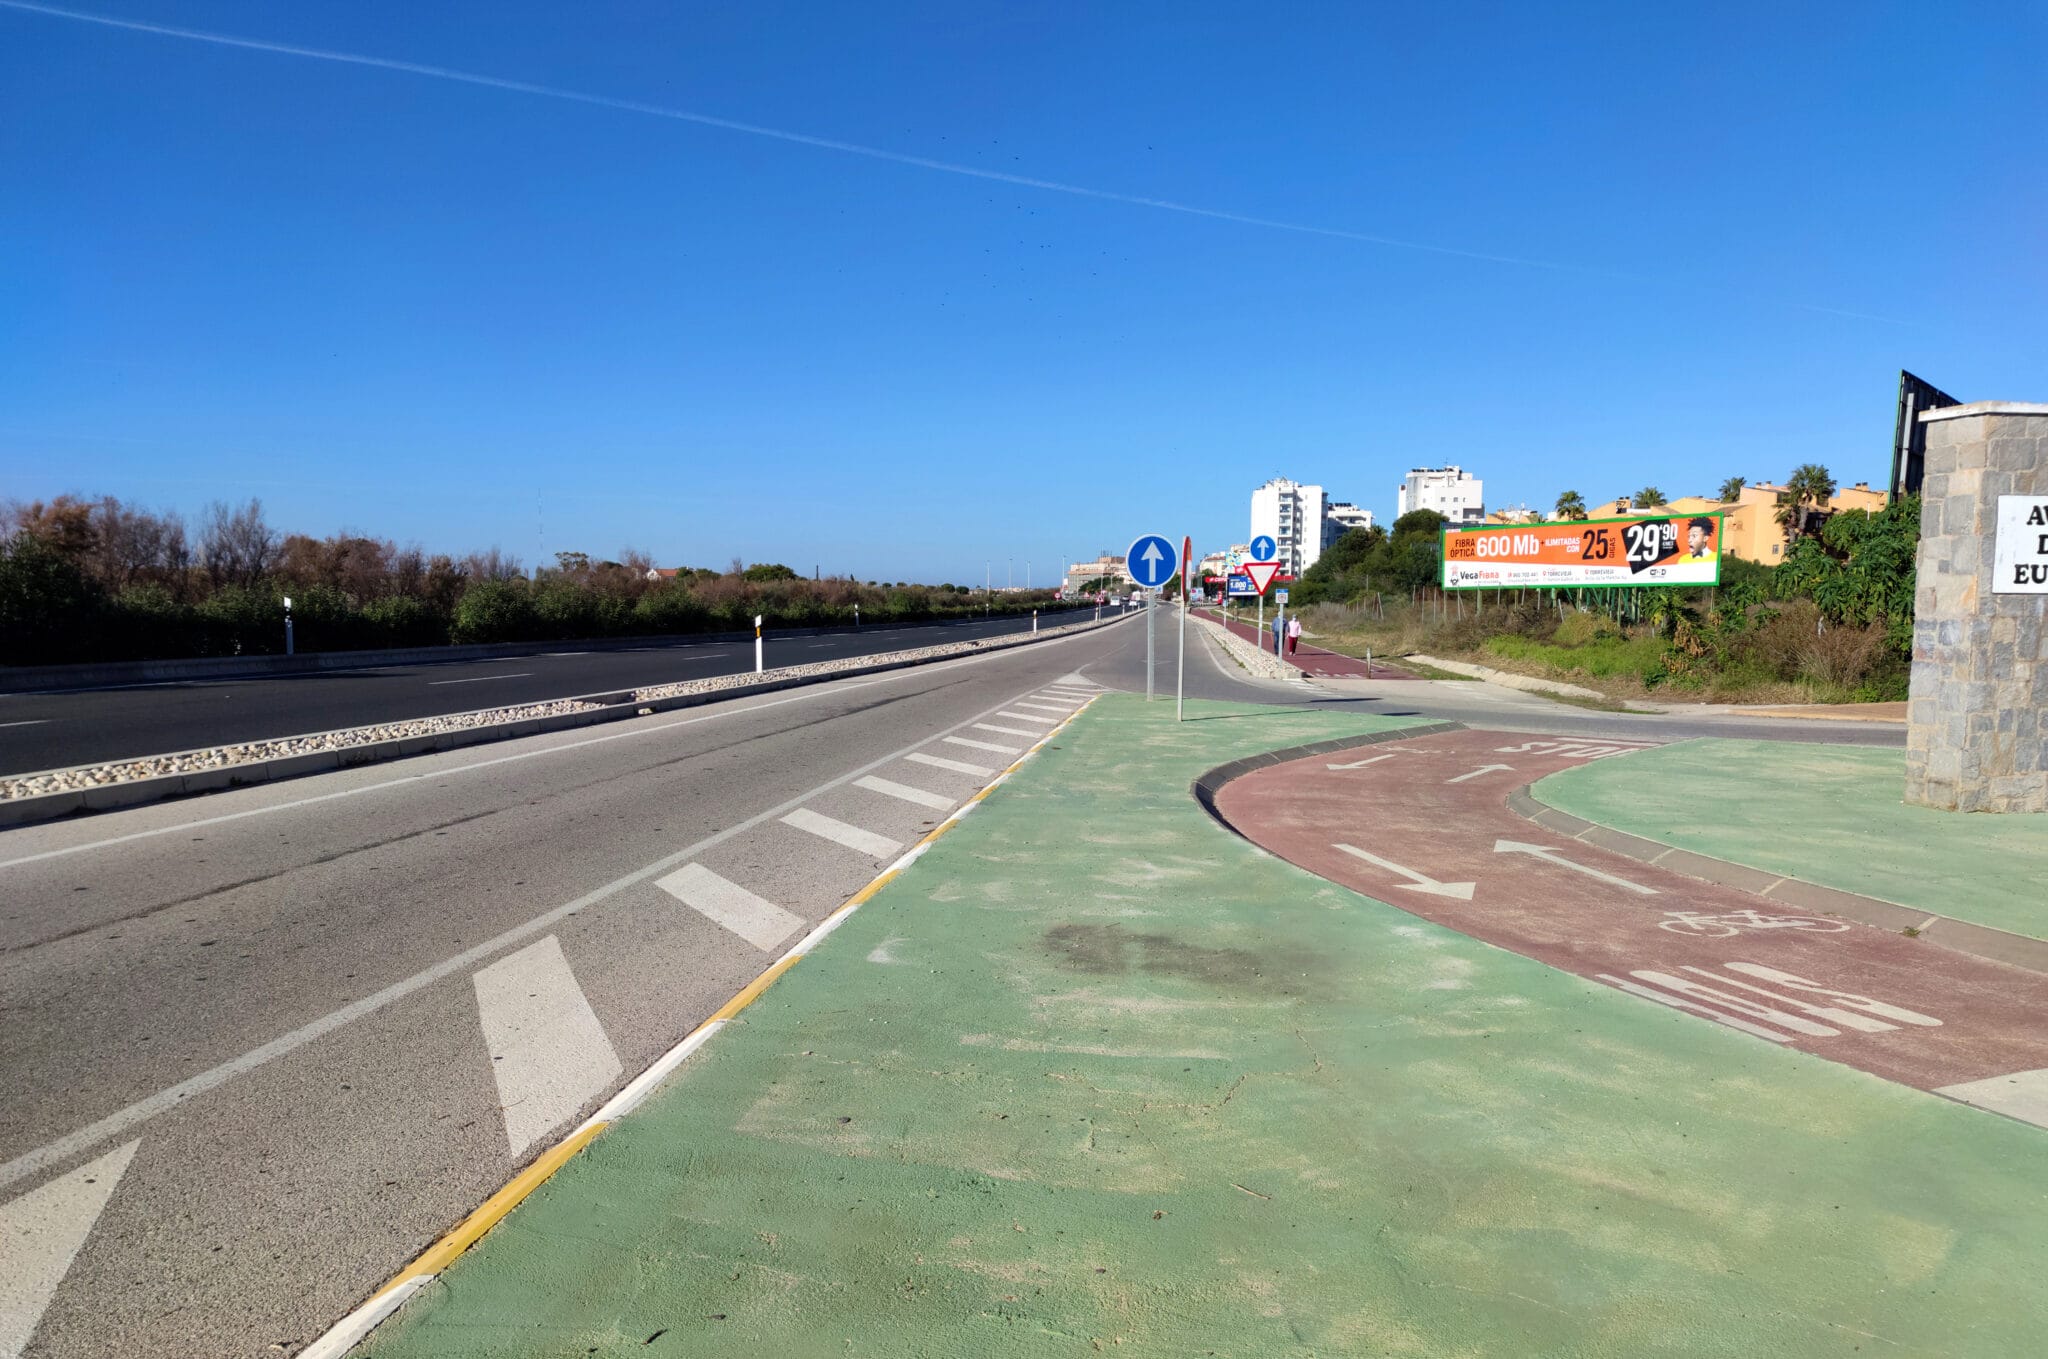 Bicycle path in Torrevieja, Spain in the La Mata area